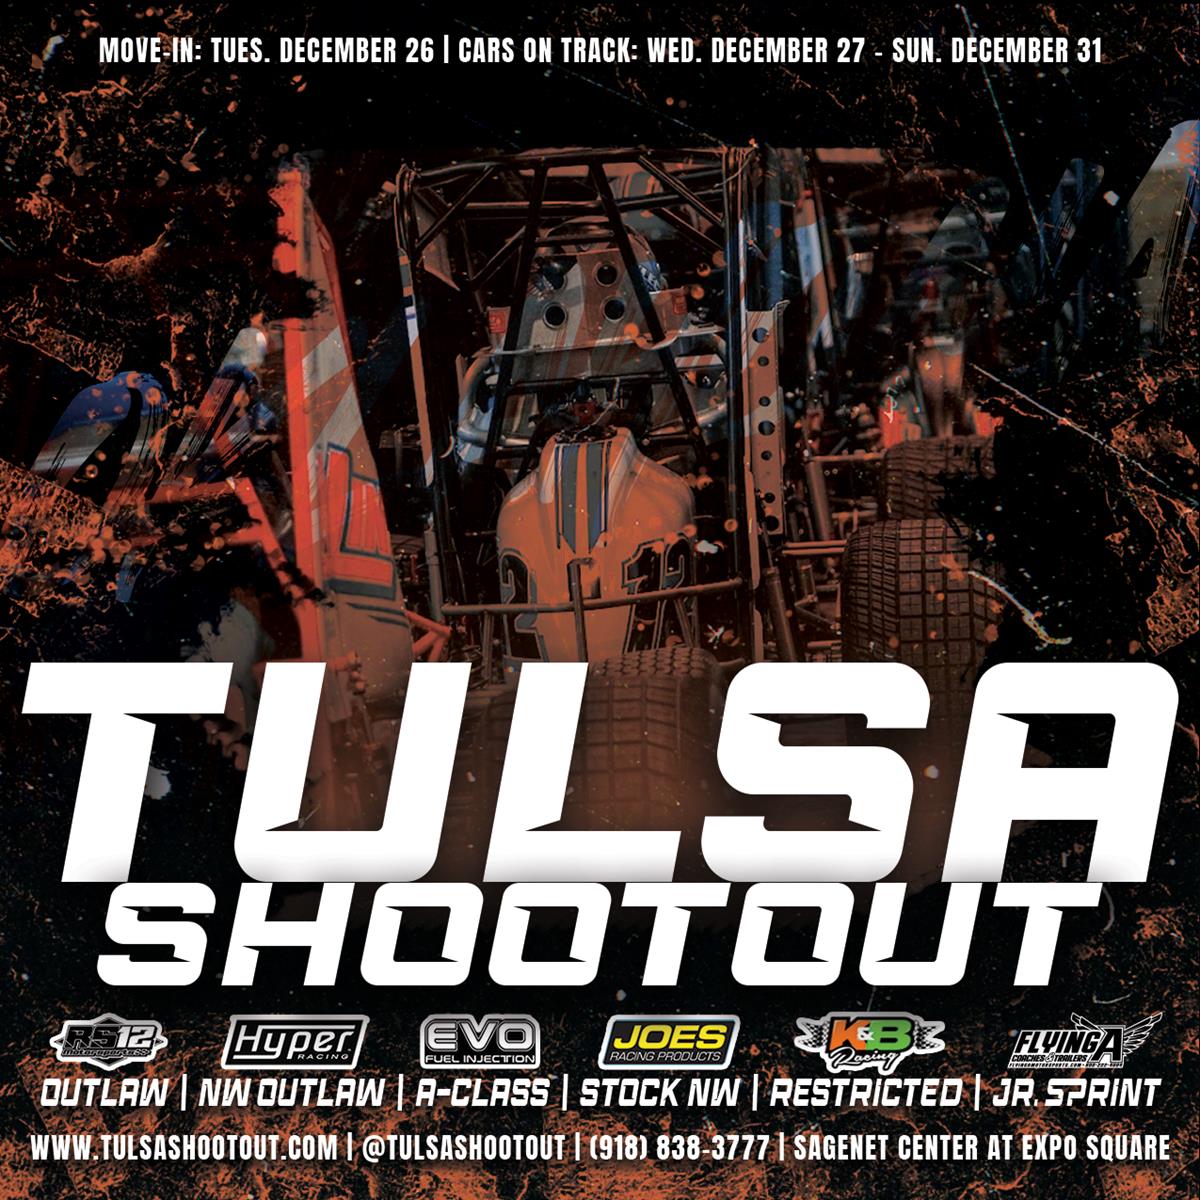 Early Entries Put The 39th Annual Tulsa Shootout On Record Watch!